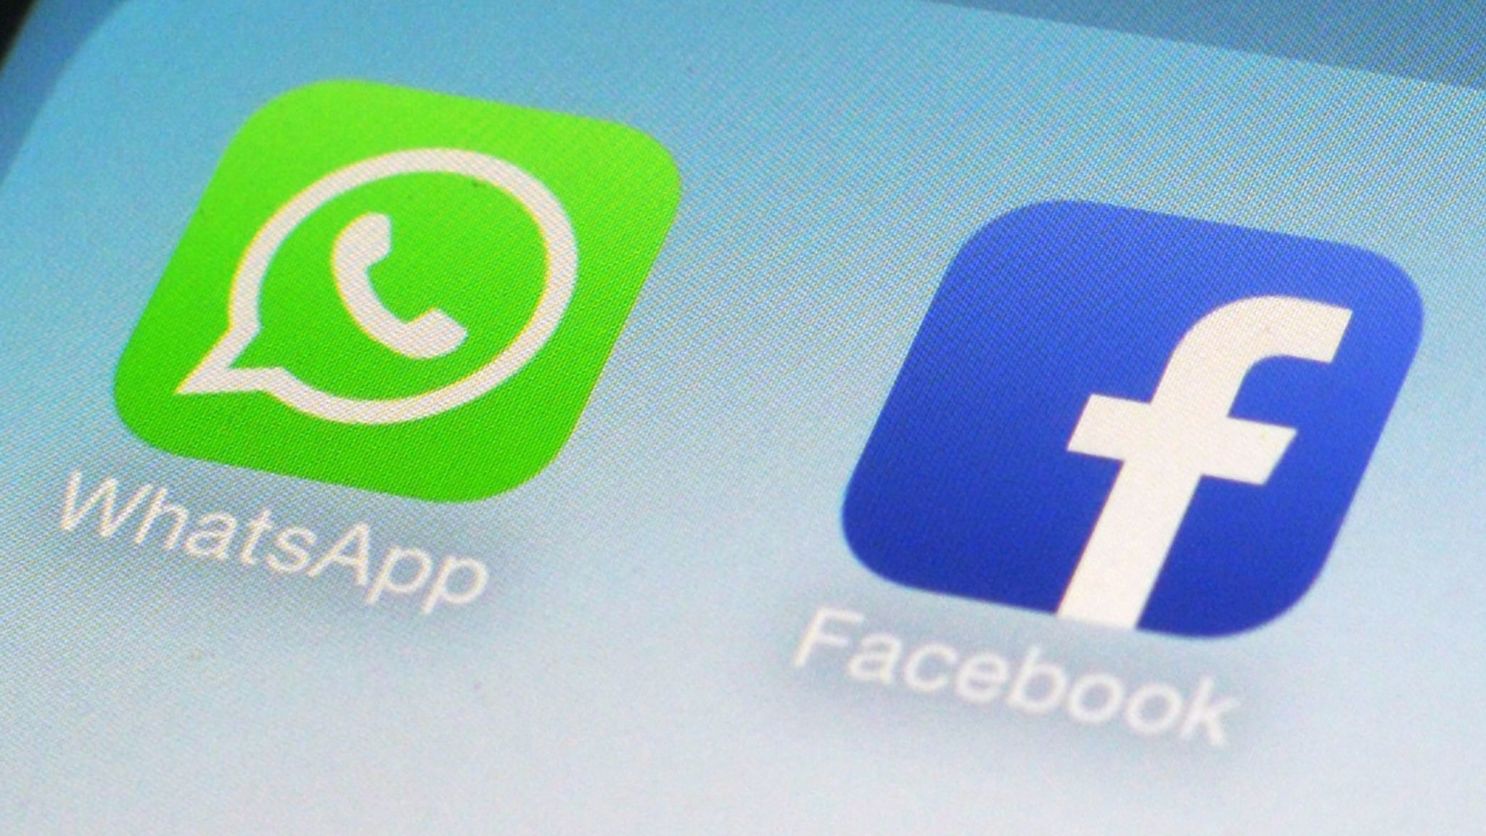 WhatsApp defers privacy update over client ‘confusion’ and reaction about Facebook information sharing